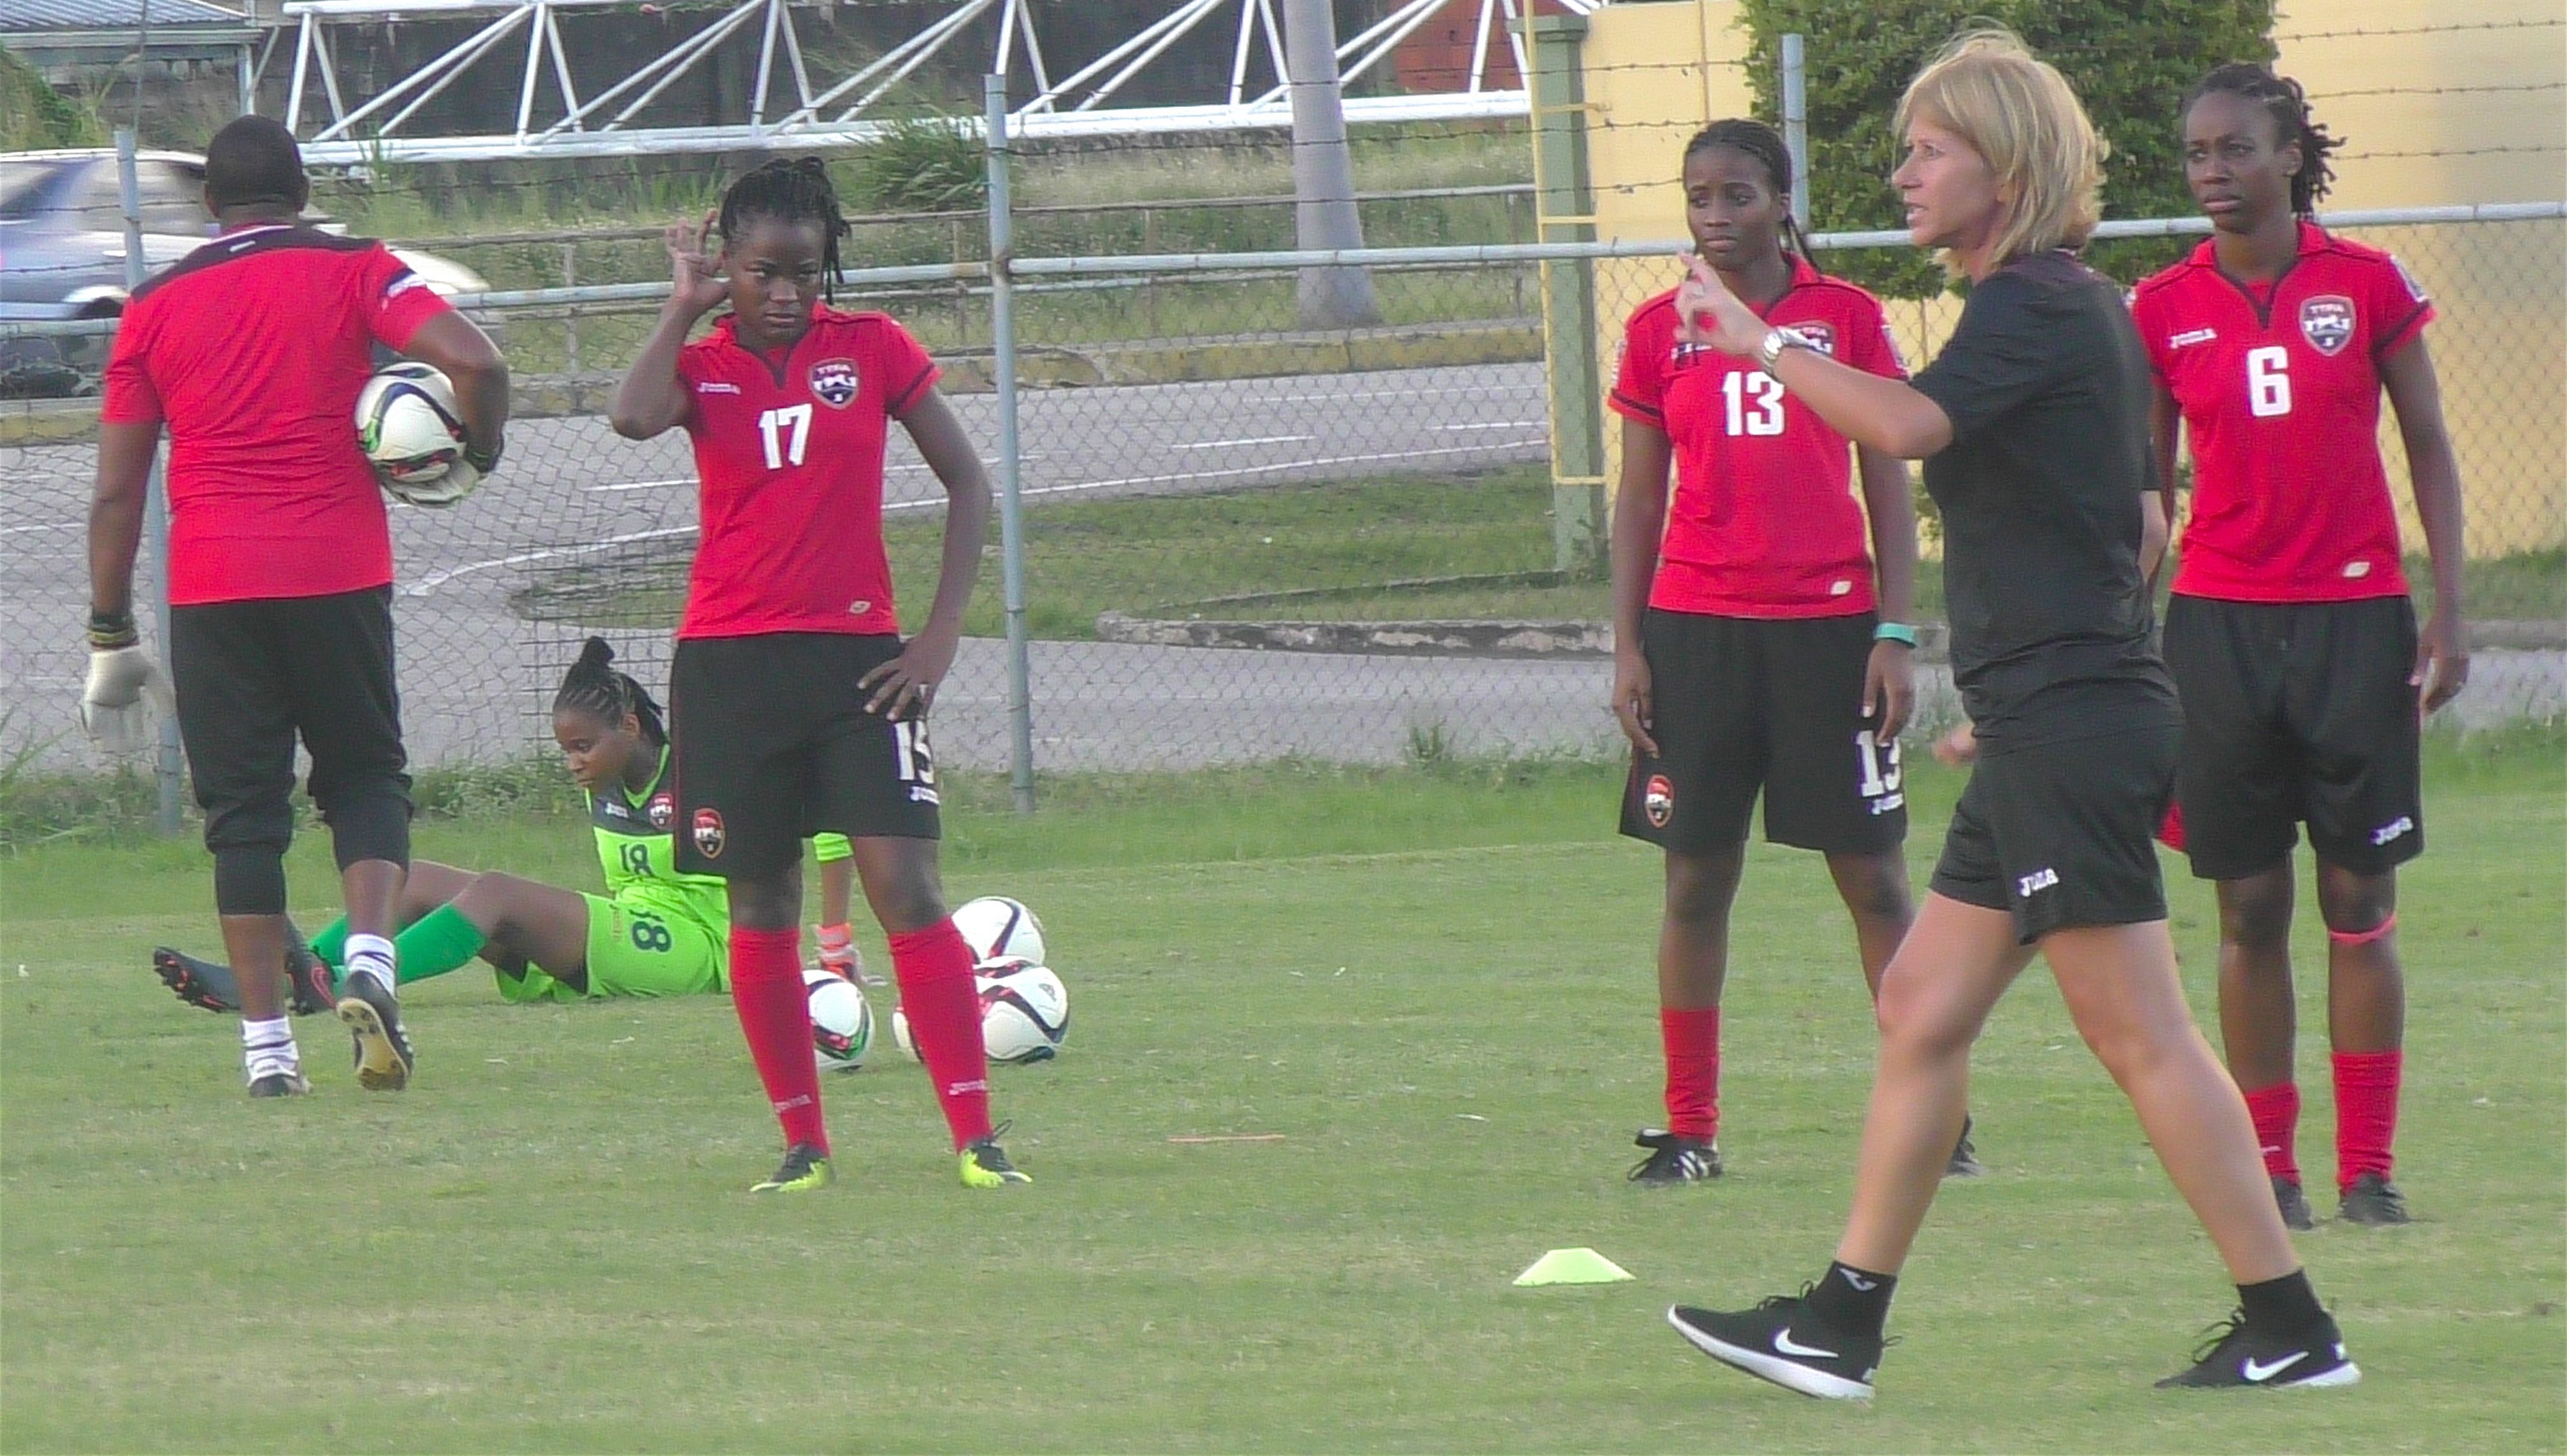 Morace presses on with Women’s team preparations.